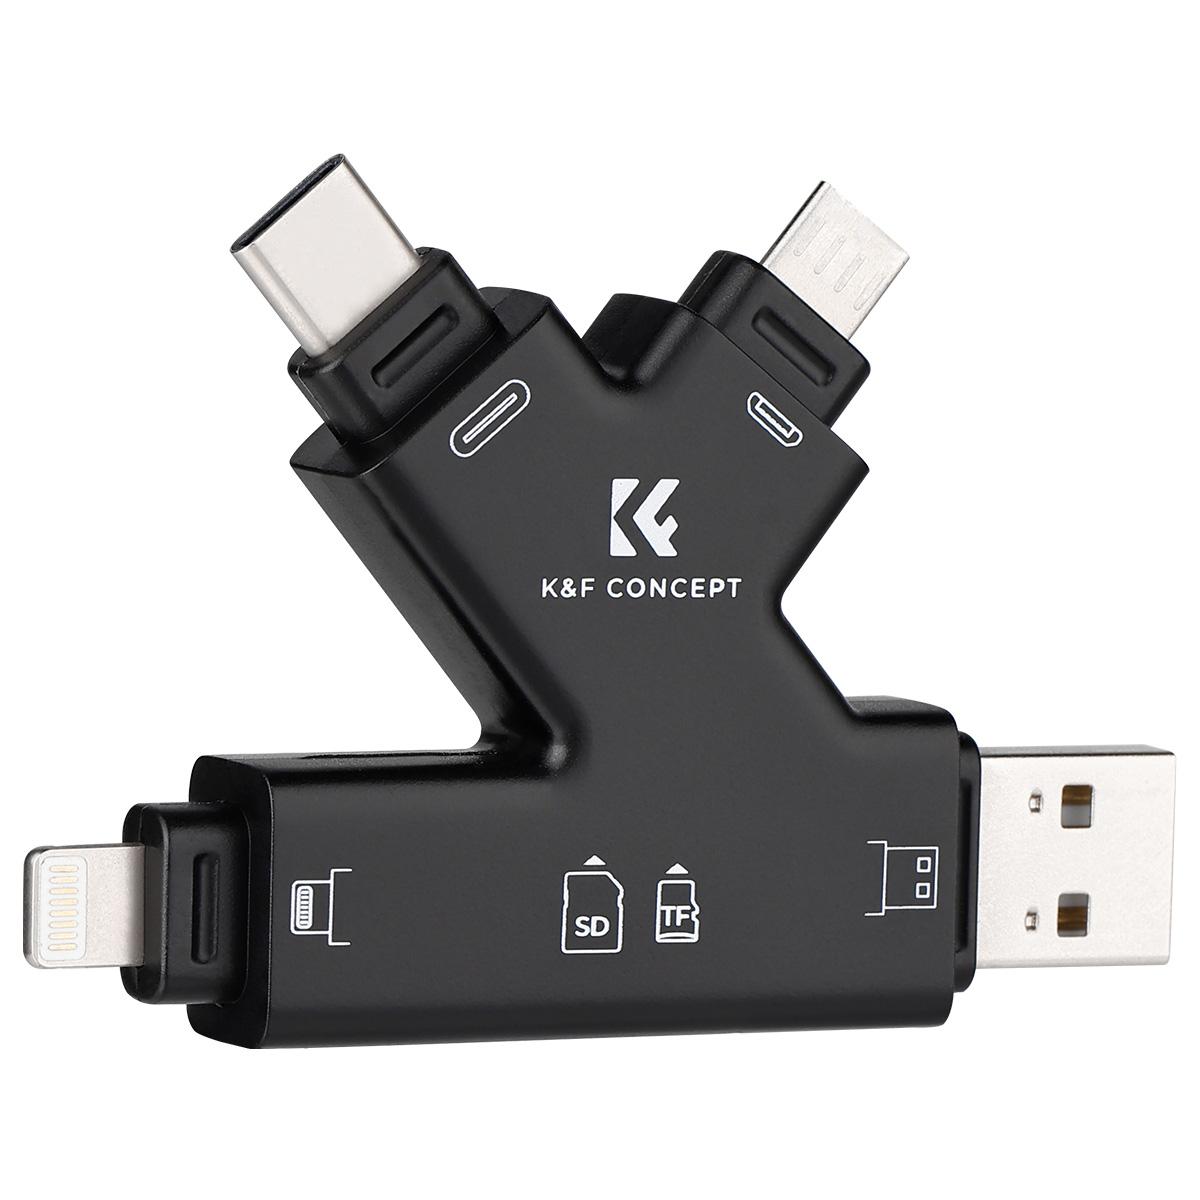 SD Card Reader for iPhone/iPad/Android/Mac/Computer/Camera - K&F Concept